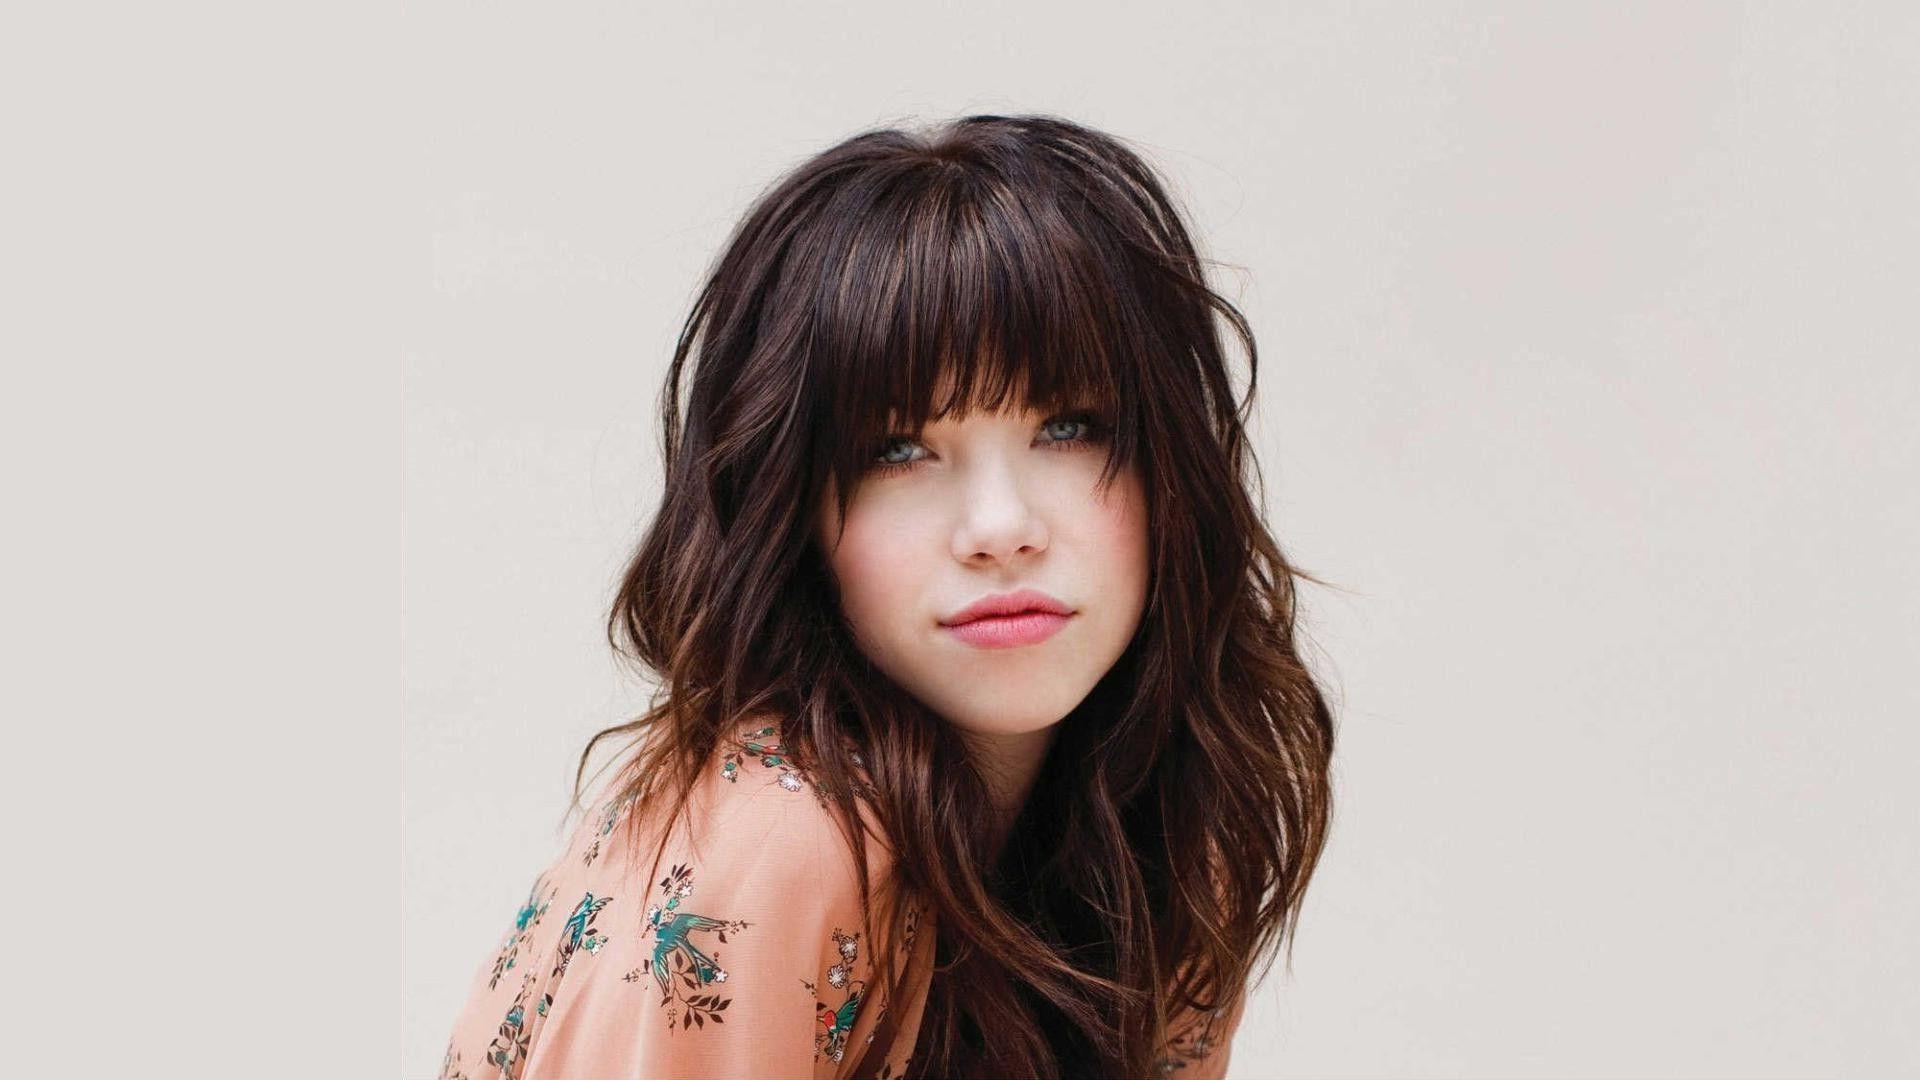 Carly Rae Jepsen Wallpaper High Resolution and Quality Download